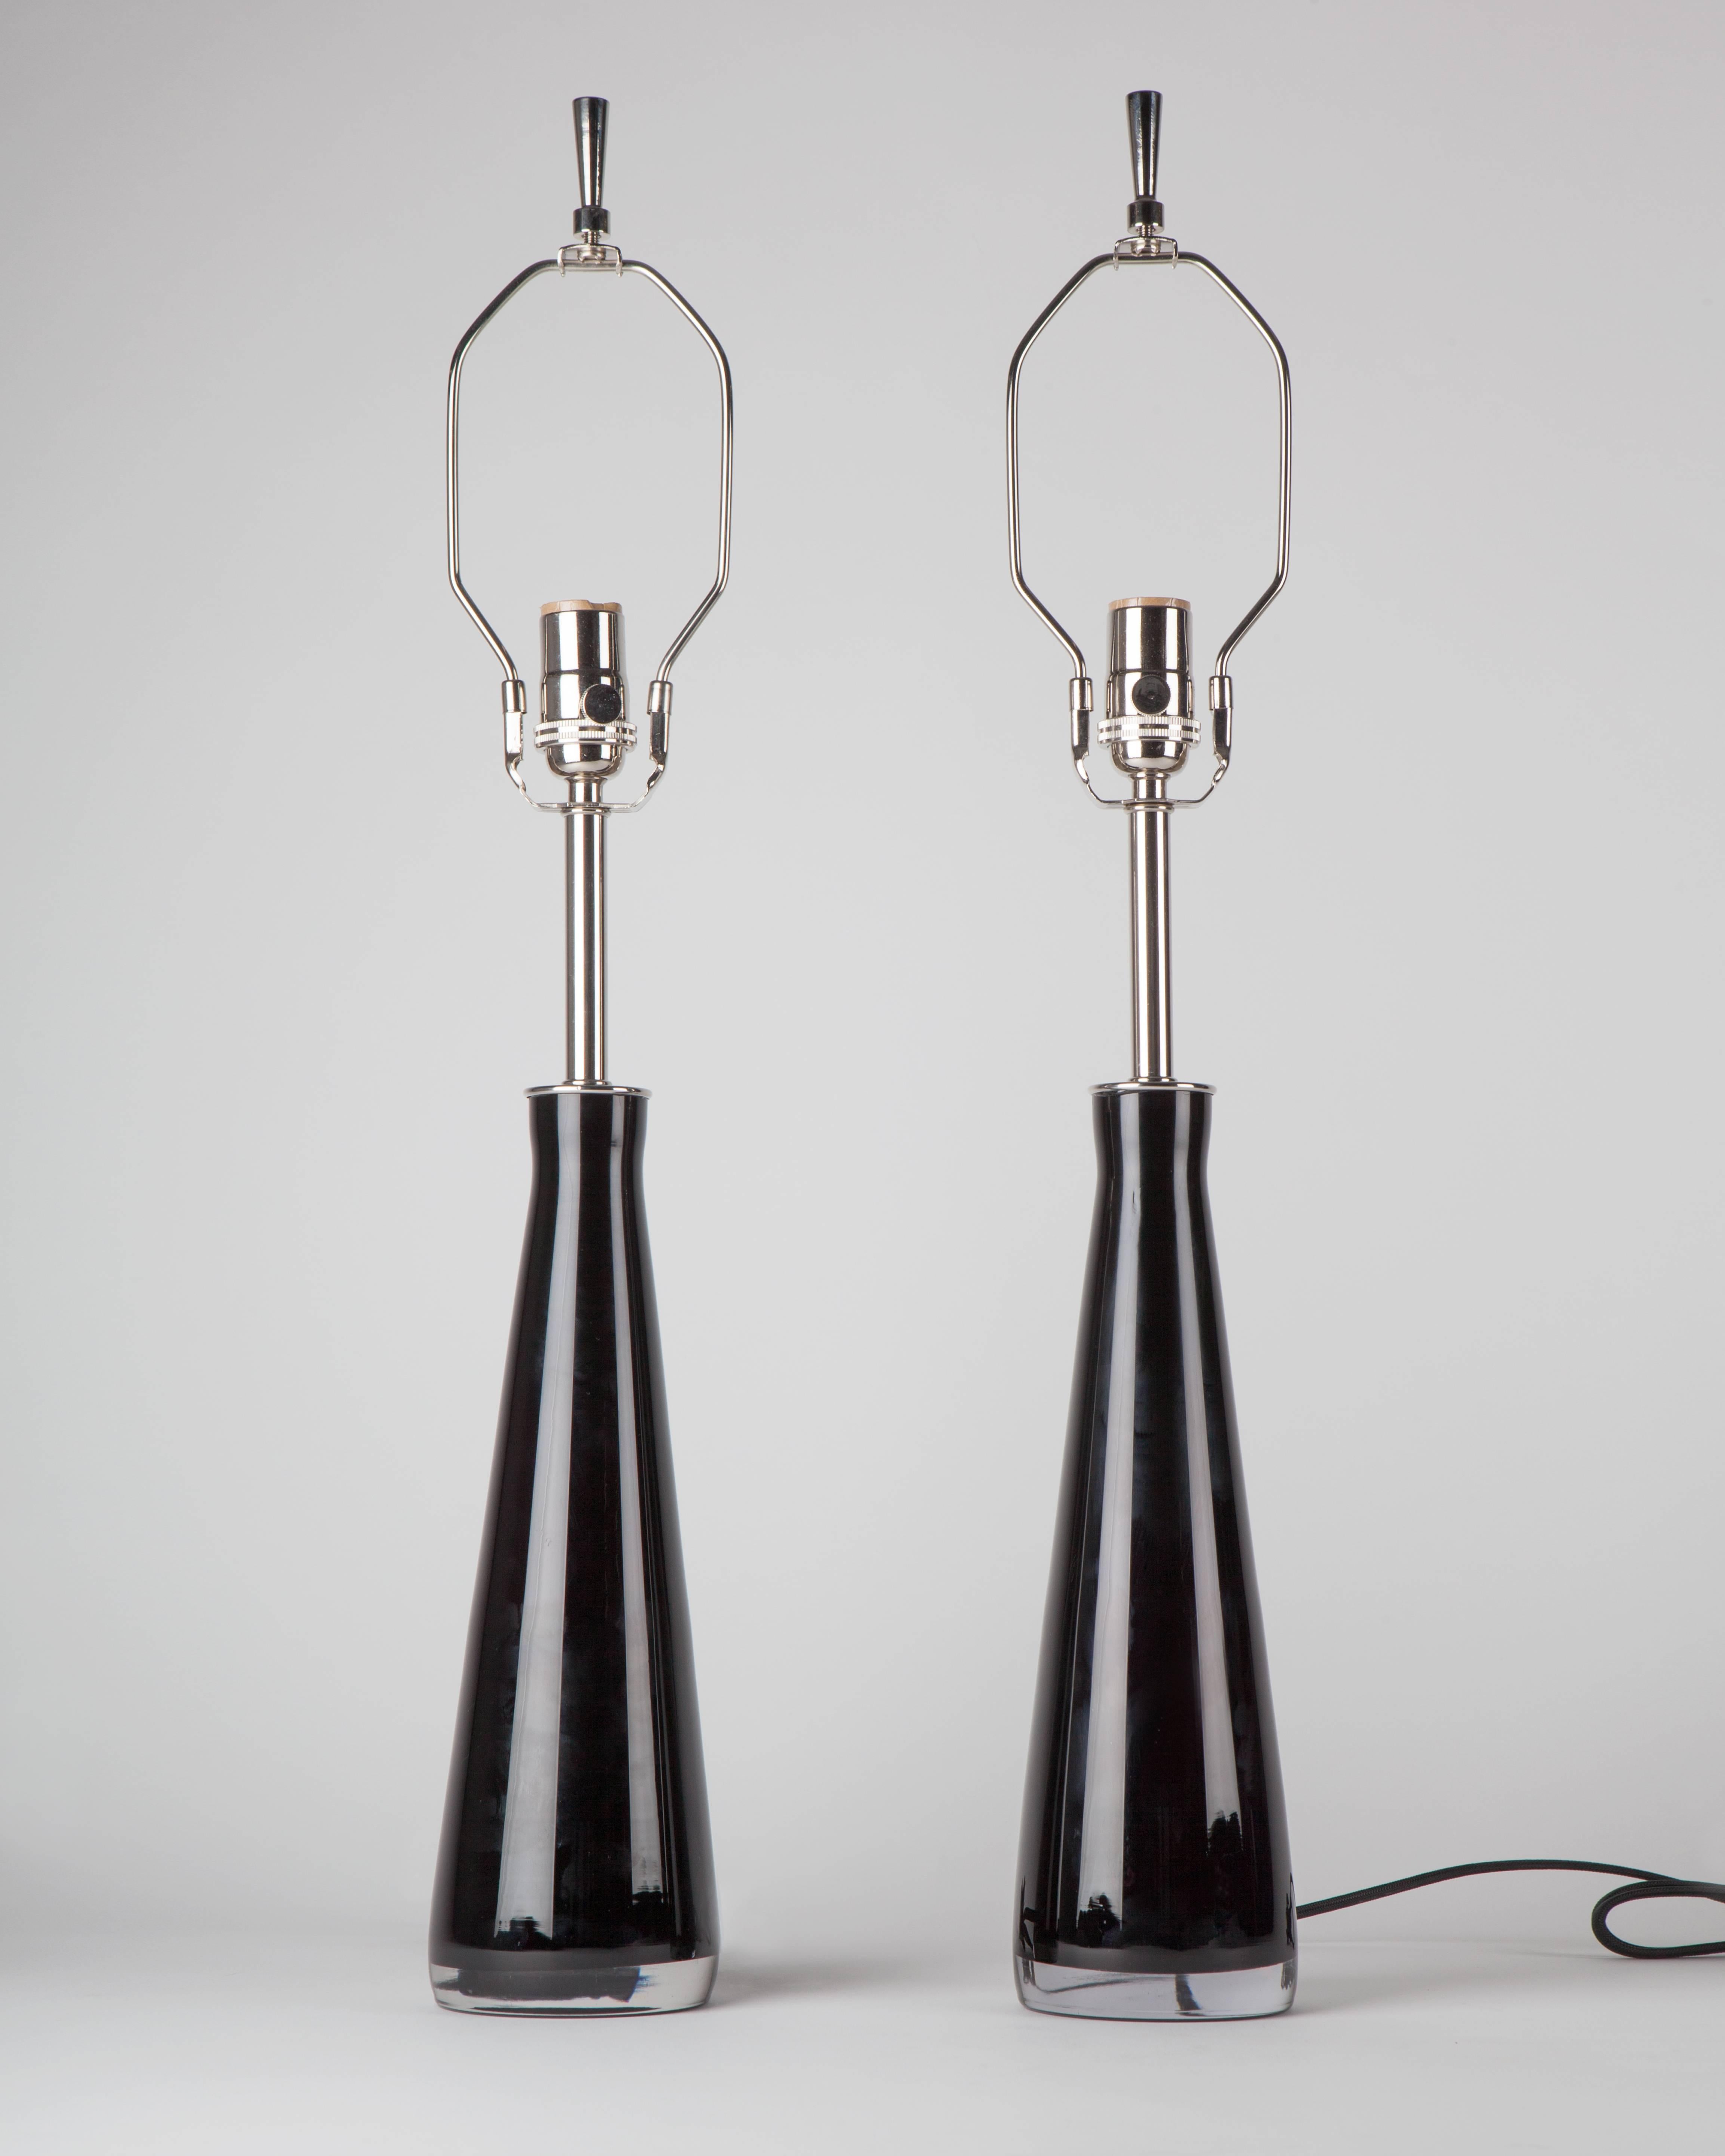 ATL1941.
A pair of dark purple cased glass lamps with nickel fittings signed by the Swedish maker Falkenbergs Belysning. Due to the antique nature of this fixture, there may be some nicks or imperfections in the glass.

Dimensions:
Overall: 27